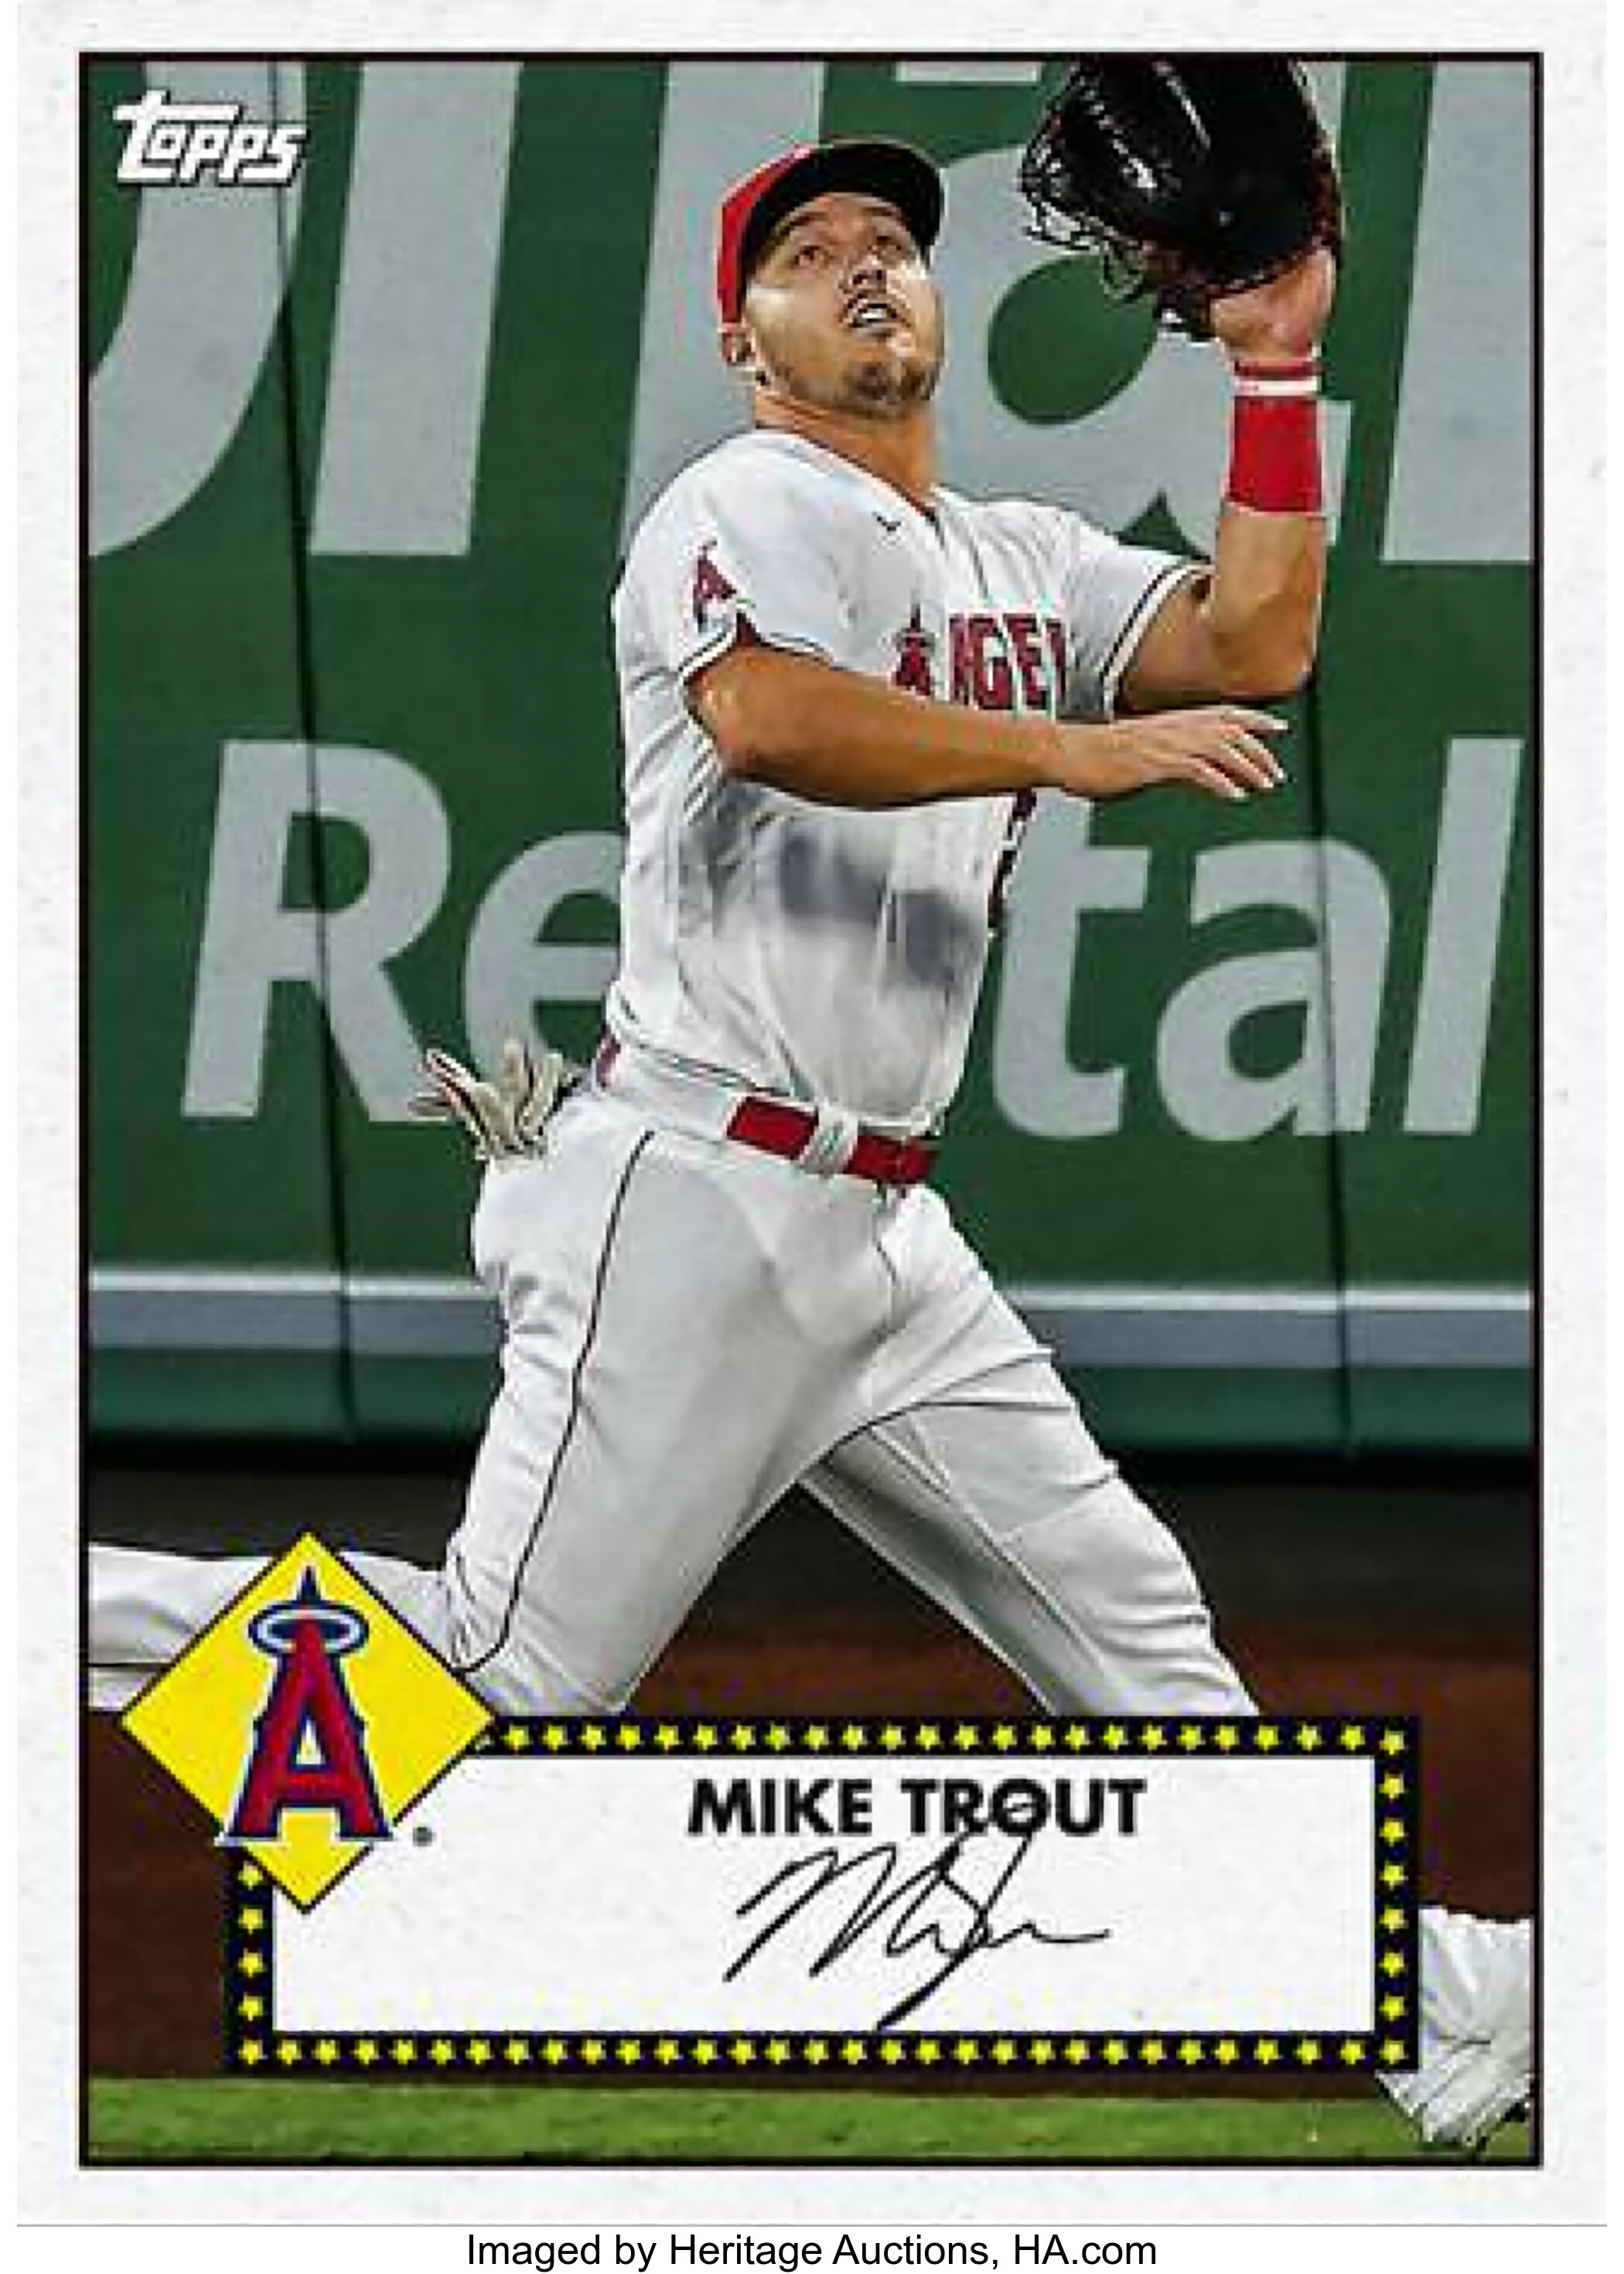 Topps is releasing official NFT baseball cards on April 20th - The